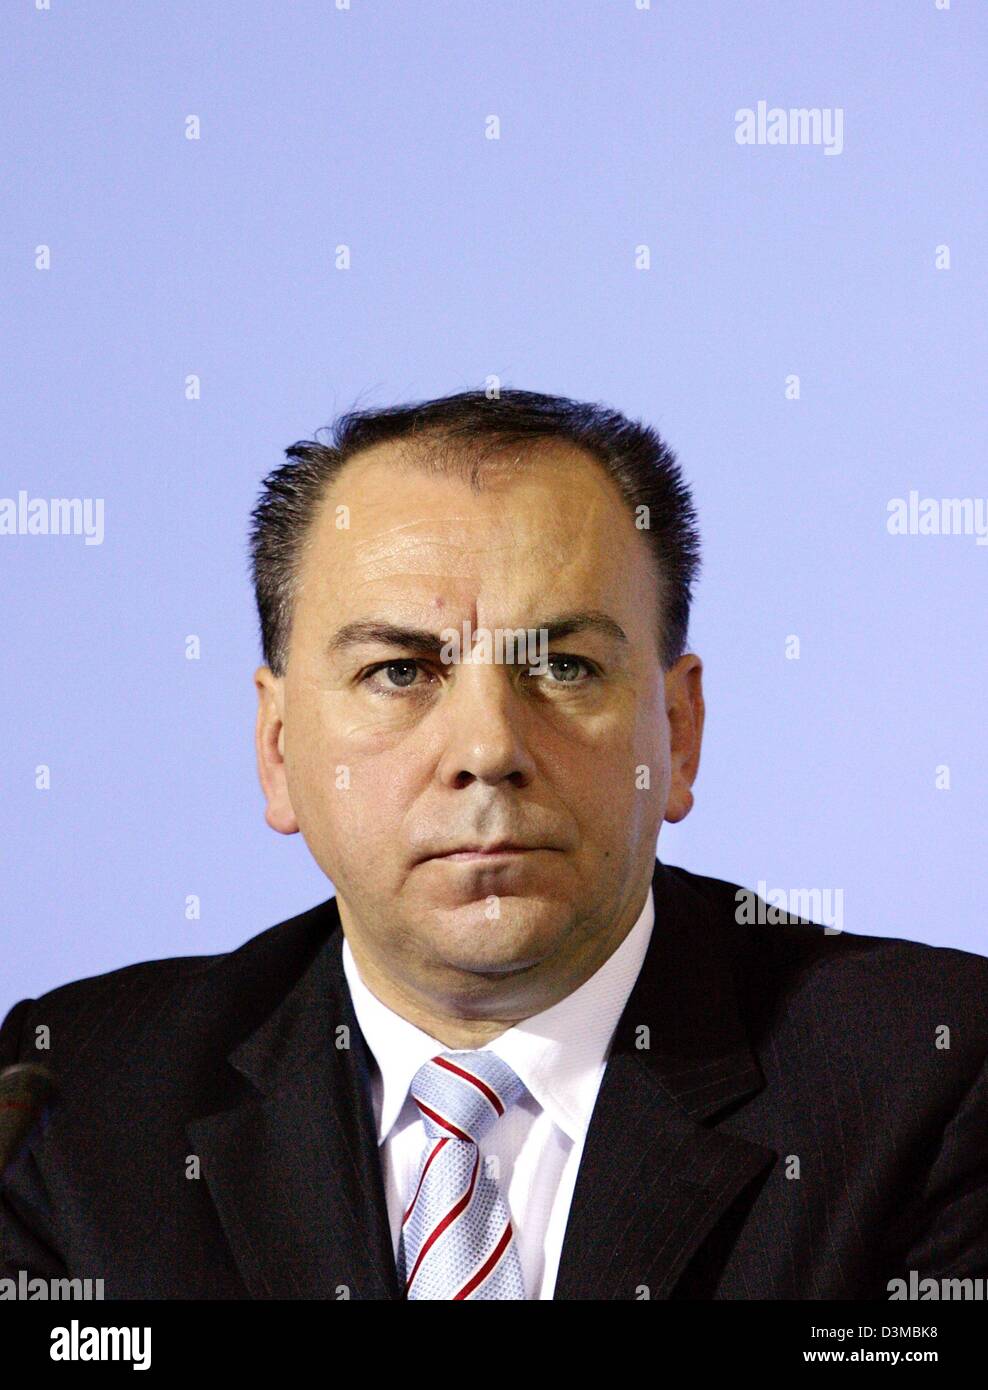 The president of the Deutsche Bundesbank Axel Weber takes part in the press conference of the 36th German-French finance and economy board meeting in Berlin, Germany, Thursday 19 January 2006. France and Germany aim to achieve  a compromise in the contentious issue of Value added tax (VAT) rates. Since 1999 the EU provides reduced rates for work intensive services including haircut Stock Photo